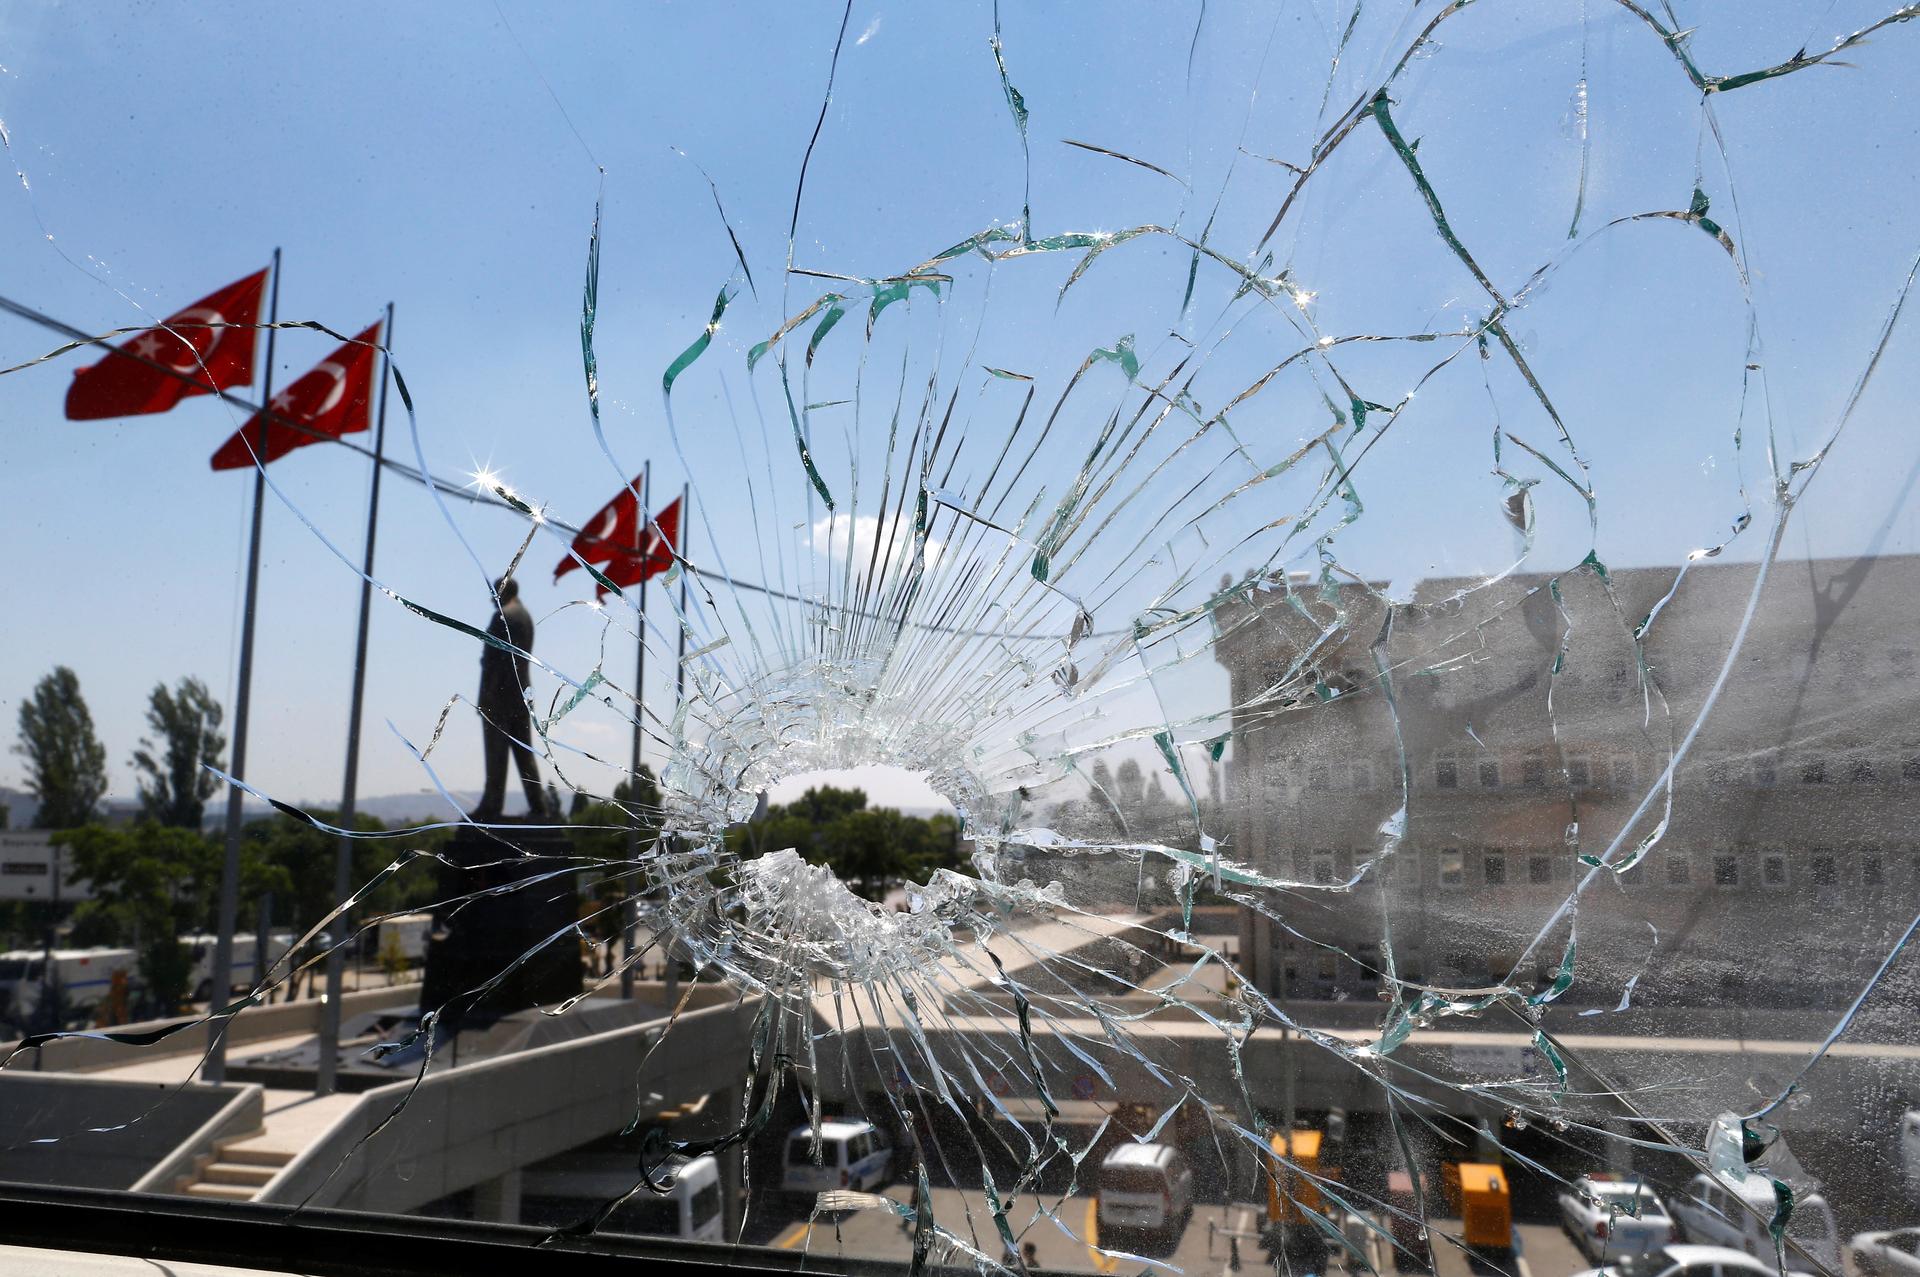 A damaged window is pictured at the police headquarters in Ankara, Turkey, July 18, 2016.